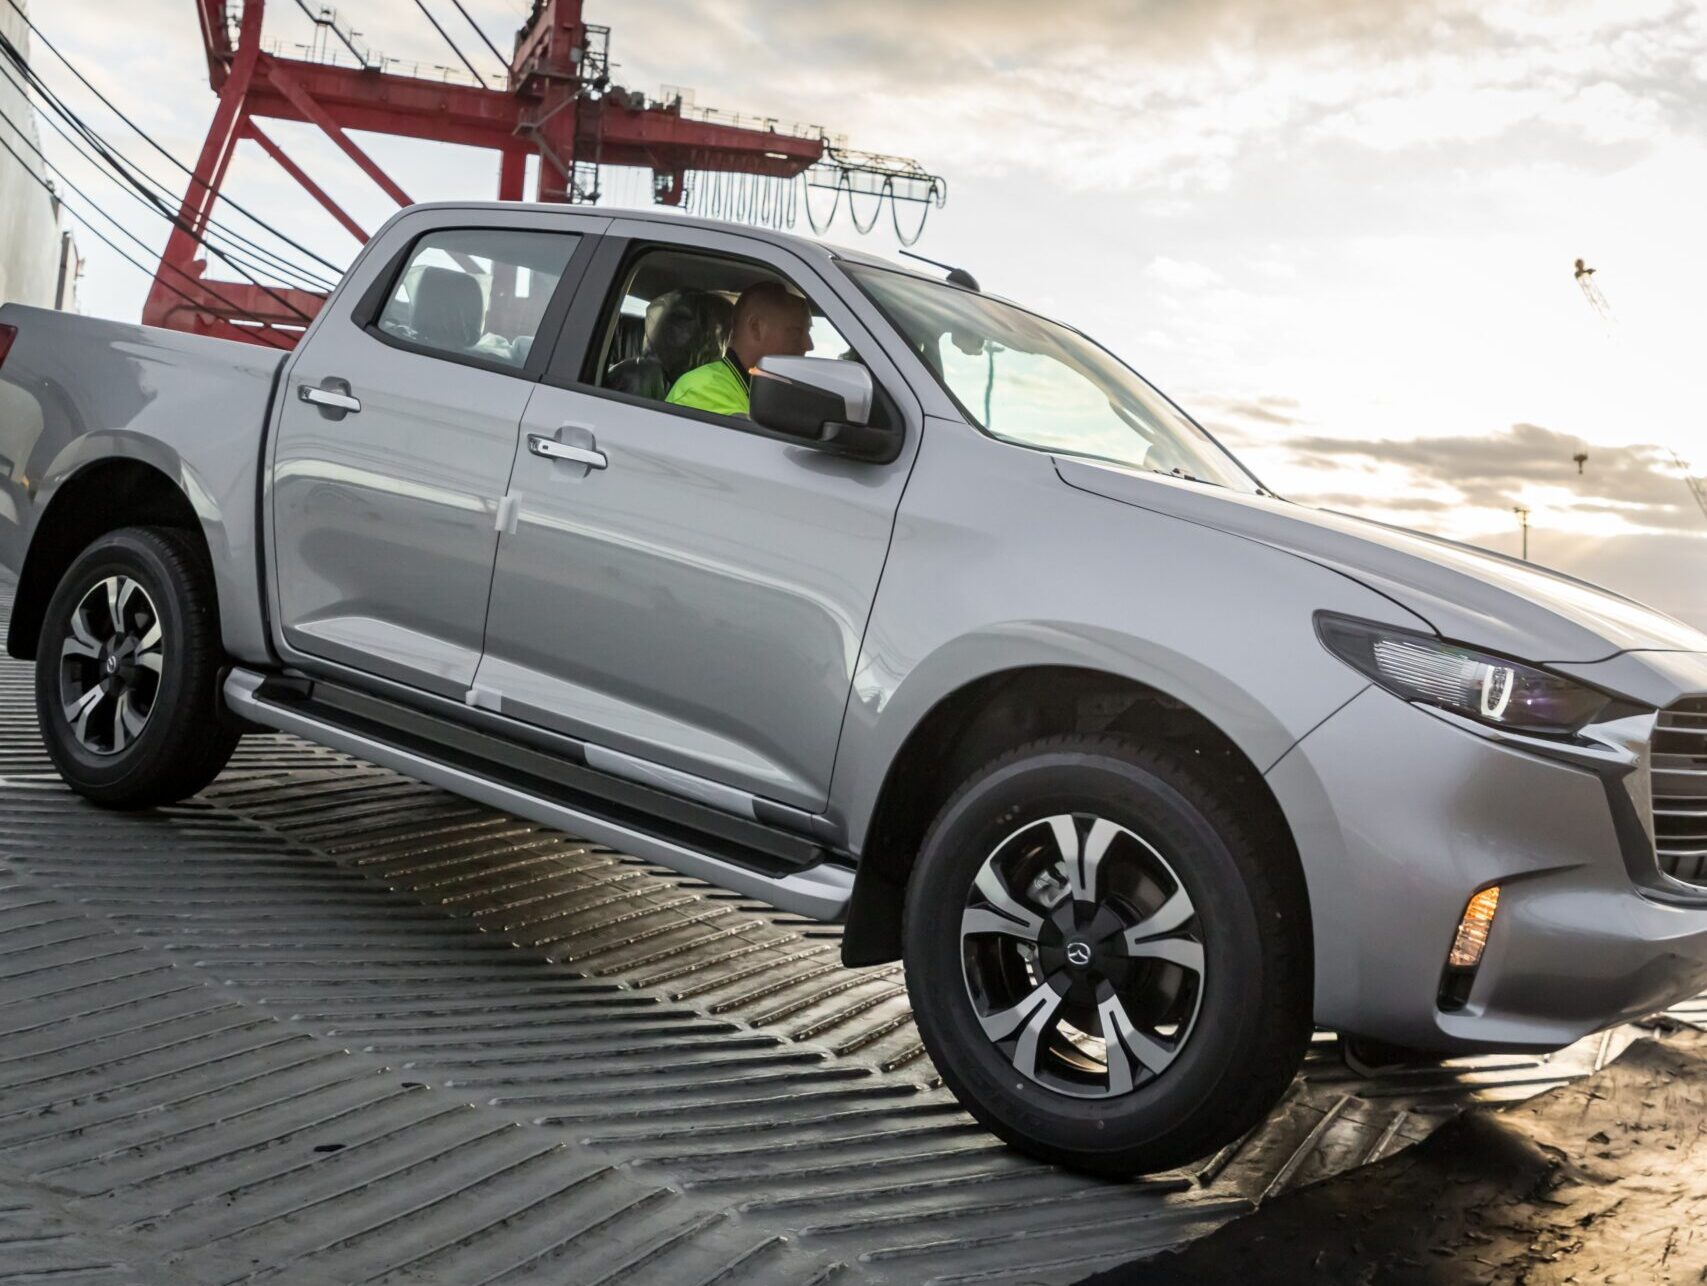 Fresh competition for the Australian dual-cab market